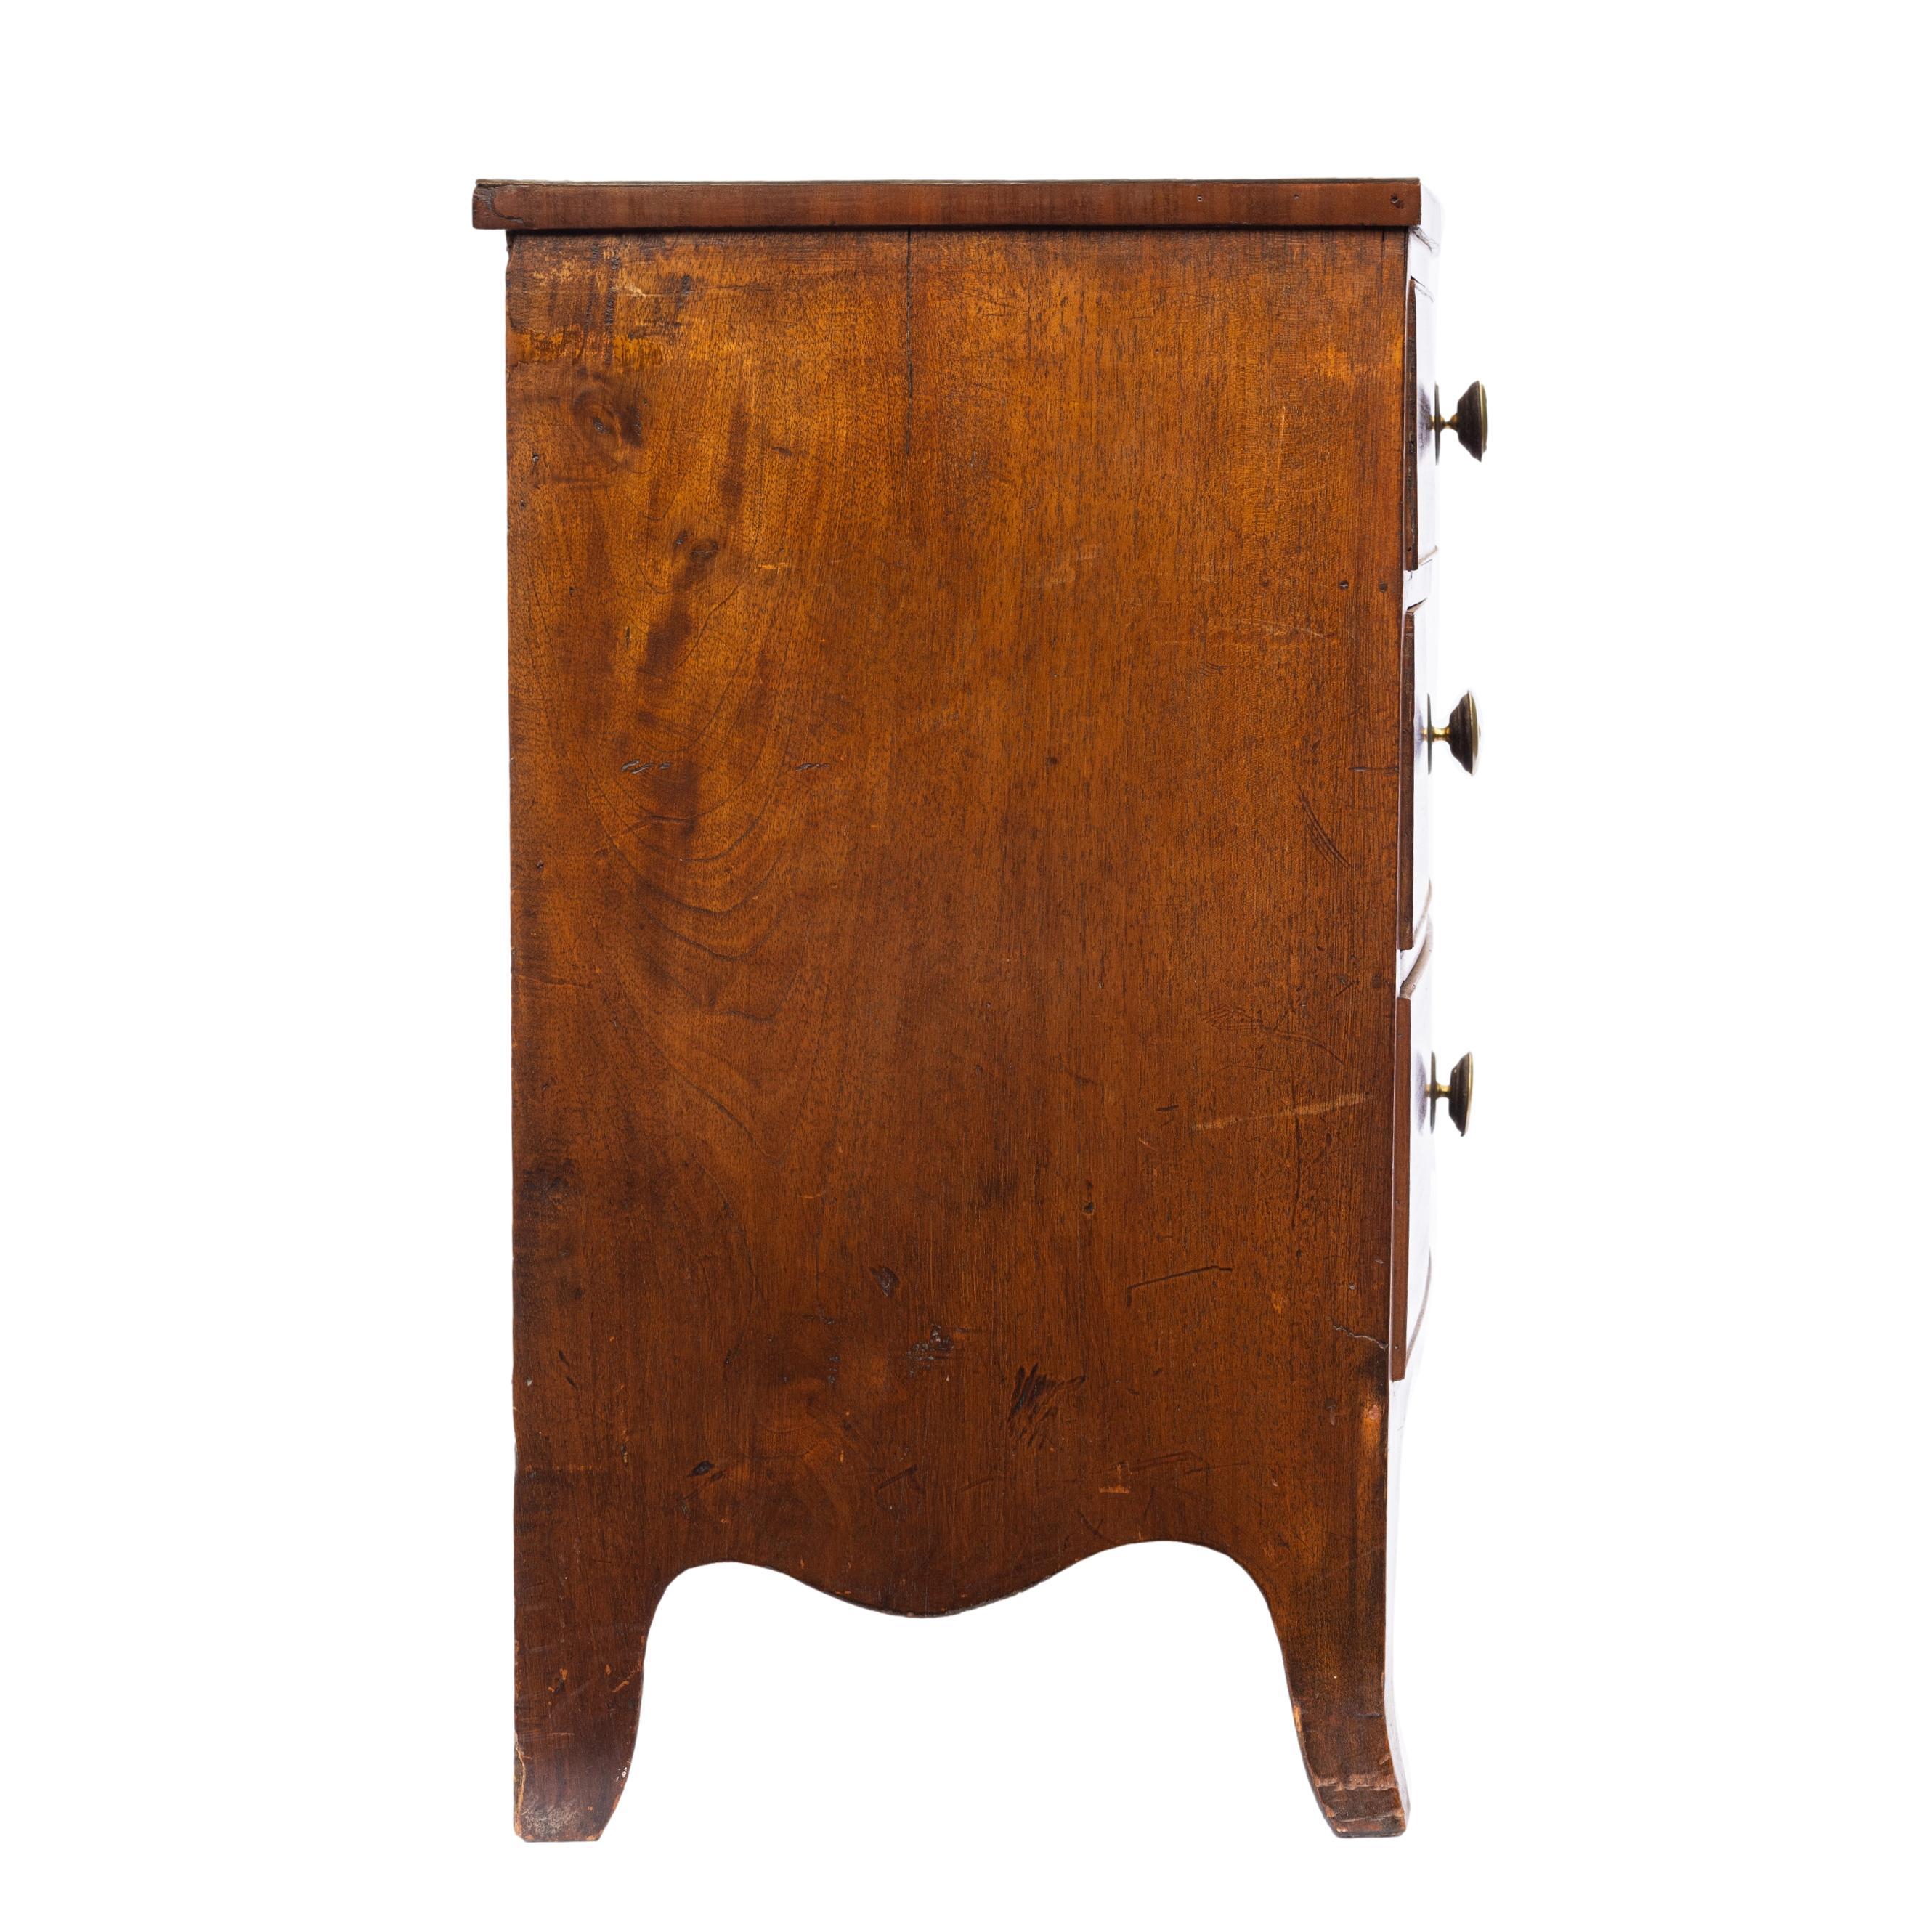 Early 19th Century Georgian Mahogany Bow-Front Chest of Drawers with Satinwood Inlay, ca. 1820